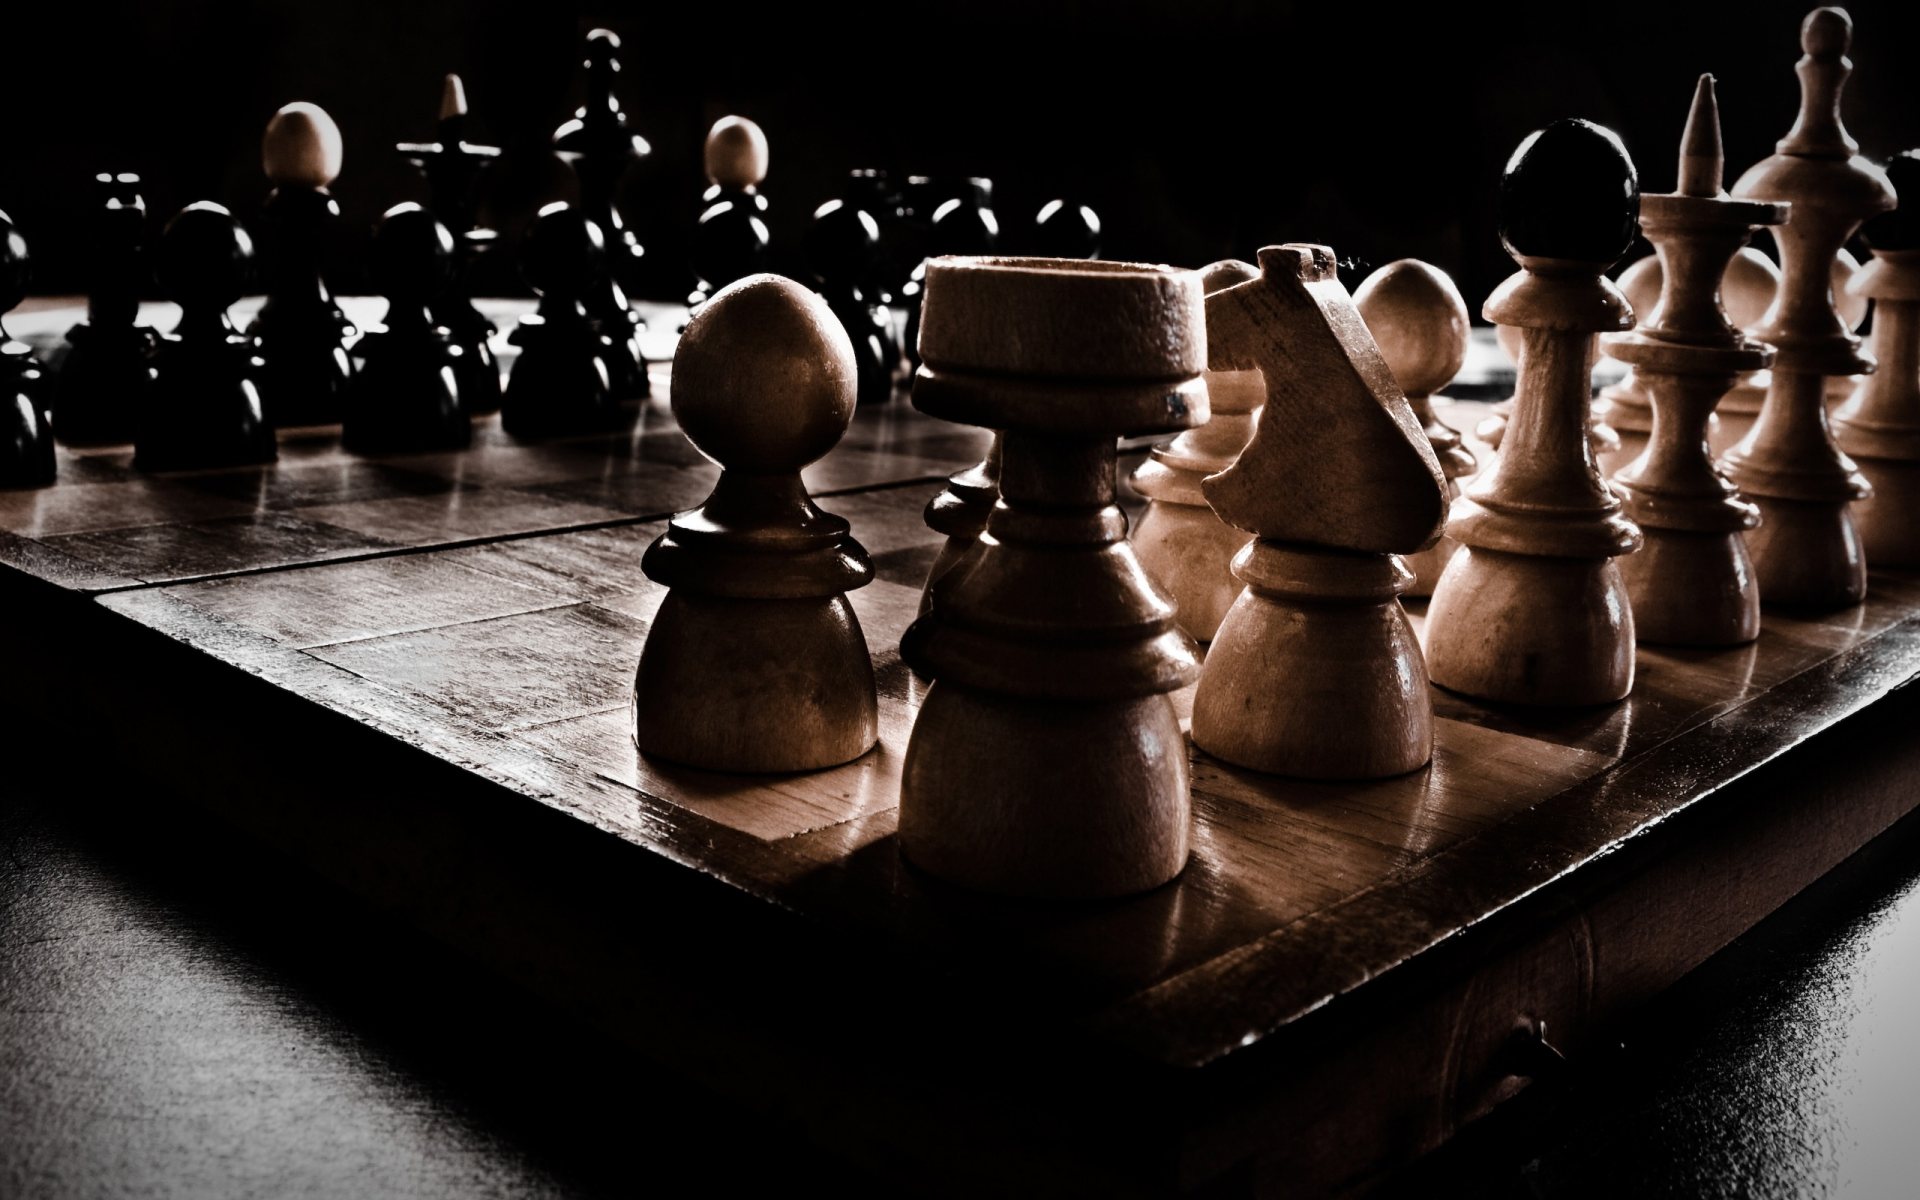 Man Made Chess HD Wallpaper | Background Image